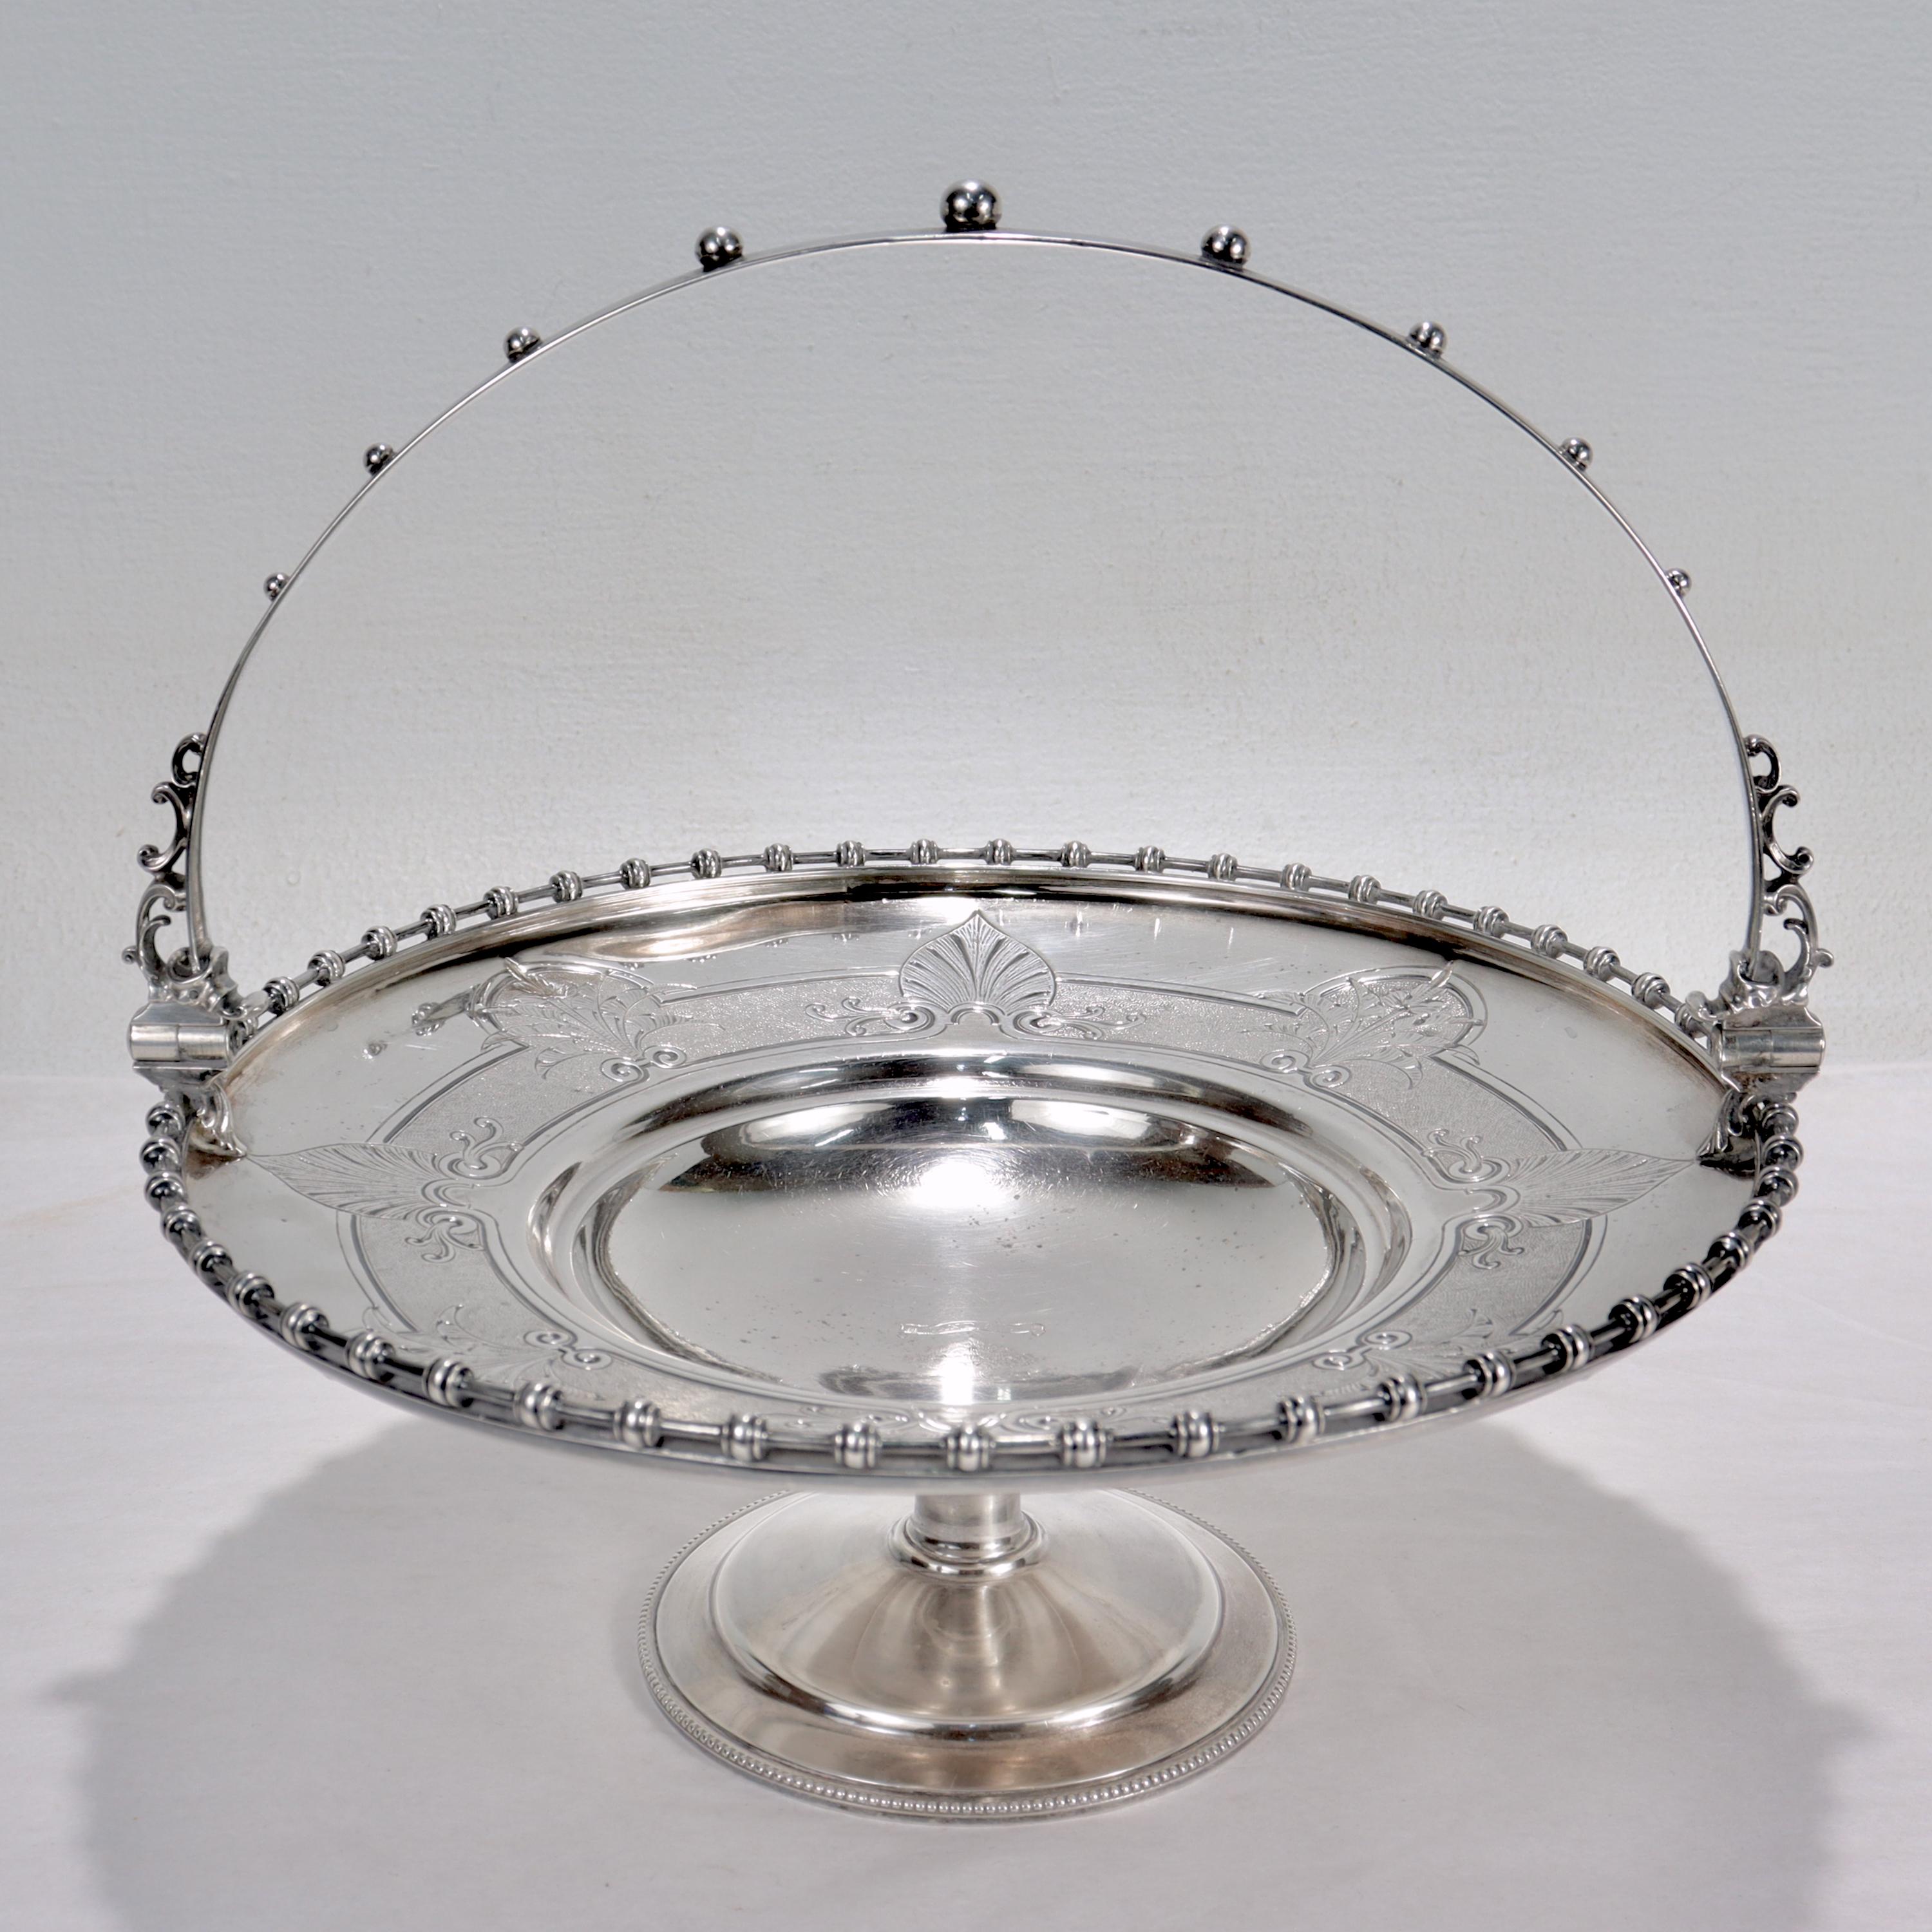 A very fine 19th century tazza of Southern interest.

In coin silver by Gorham Manufacturing Co.

The tazza having a sturdy swing handle set with graduated spheres, a pierced gallery rim, a wide border with etched anthemion devices, and a center